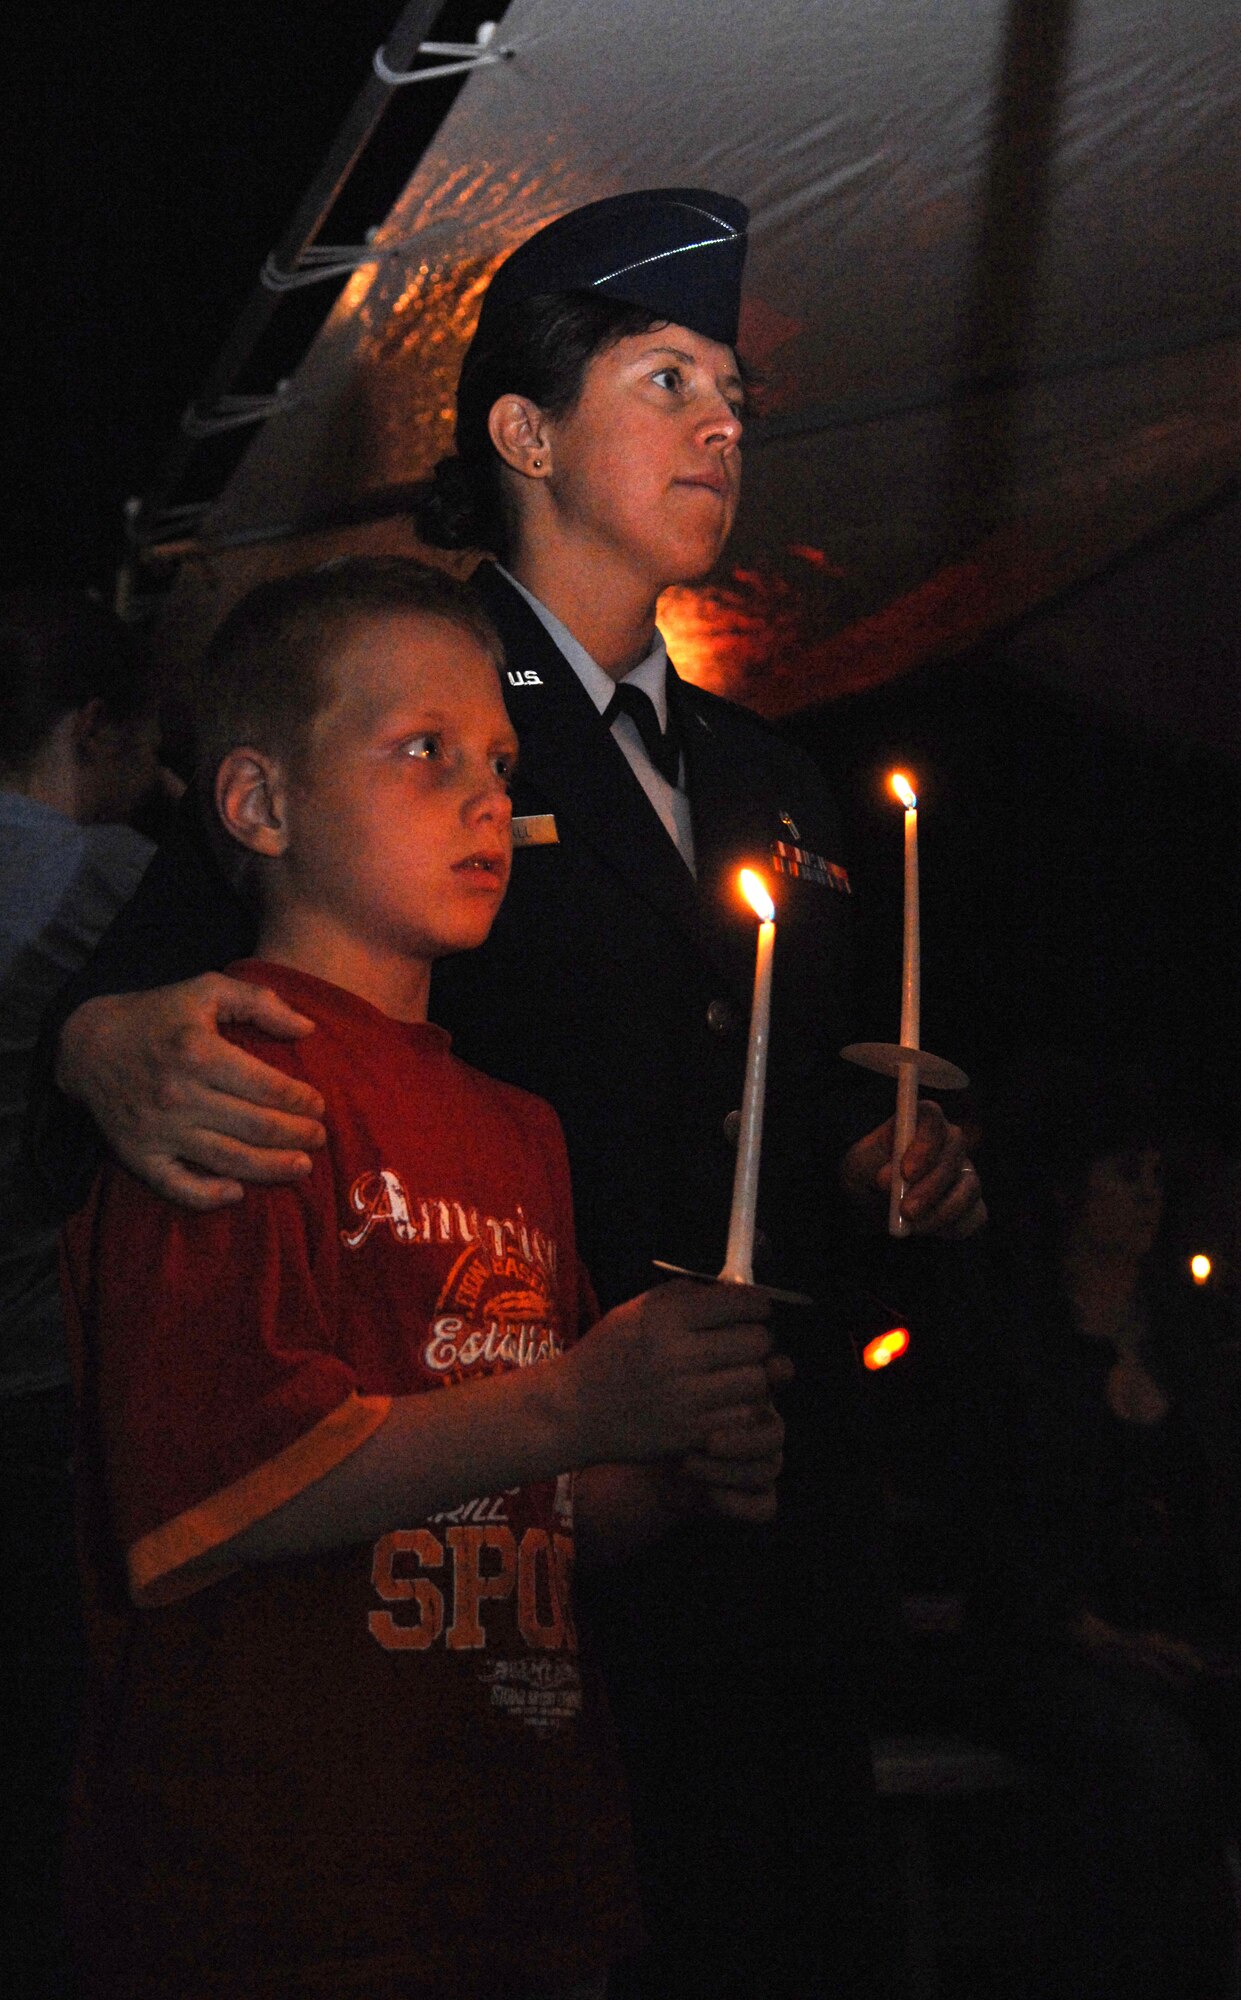 Chaplain (Capt.) Olga Westfall of Holloman Air Force Base, N.M., and her adopted son, Dmitri, pay tribute to the fallen during the candle-lighting at the 9/11 Memorial Ceremony at the New Mexico Museum of Space History, September 11. Dmitri is a new citizen to the U.S., and this was his first time learning about the tragedy on 9/11. According to the chaplain, he was very impressed by the ceremony. (U.S. Air Force photo/Airman Sondra M. Escutia)